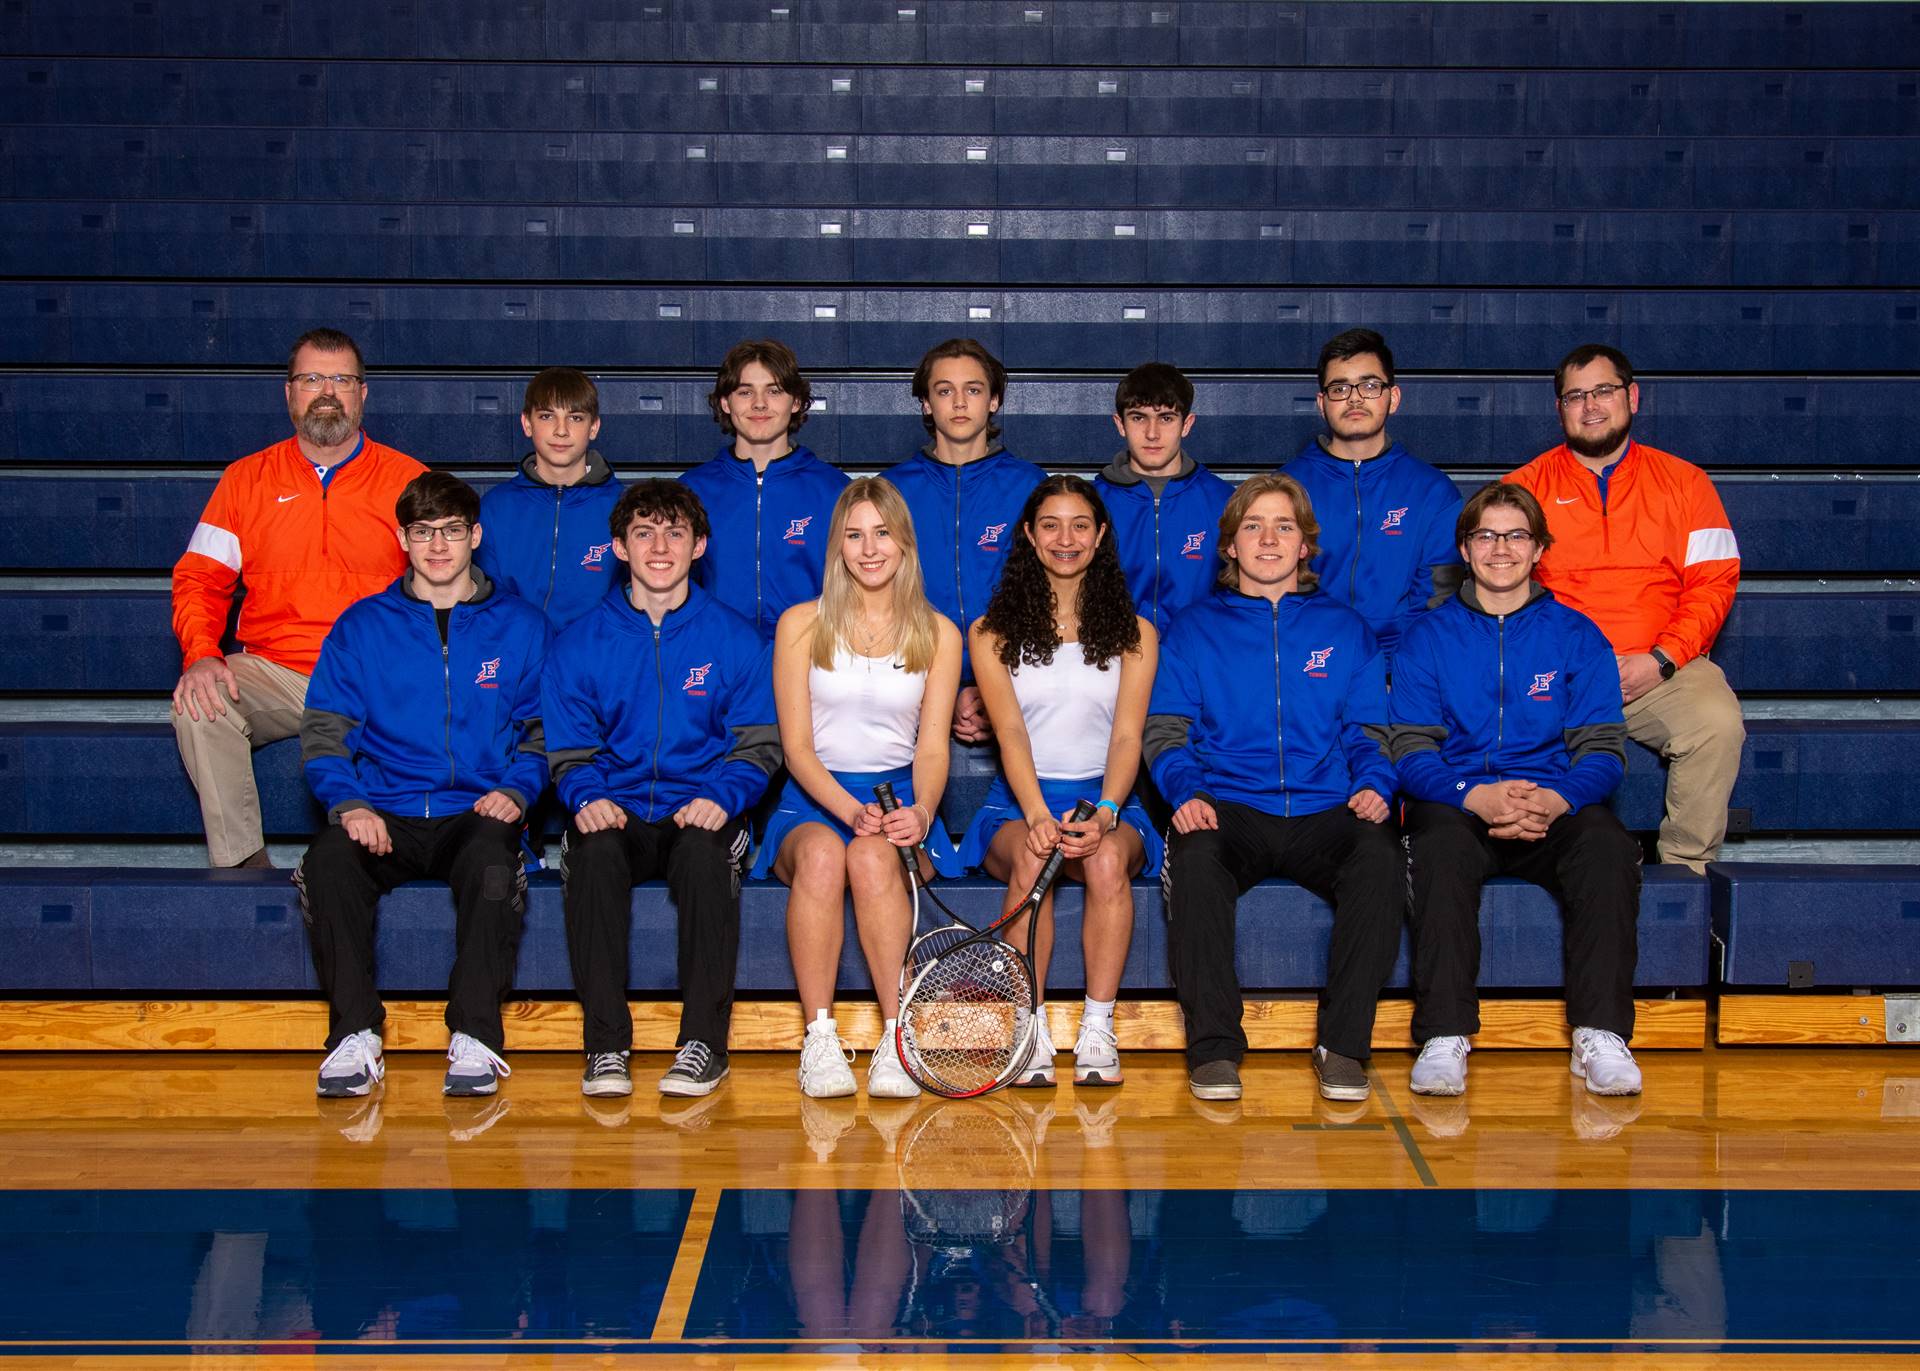 Charger Tennis Team